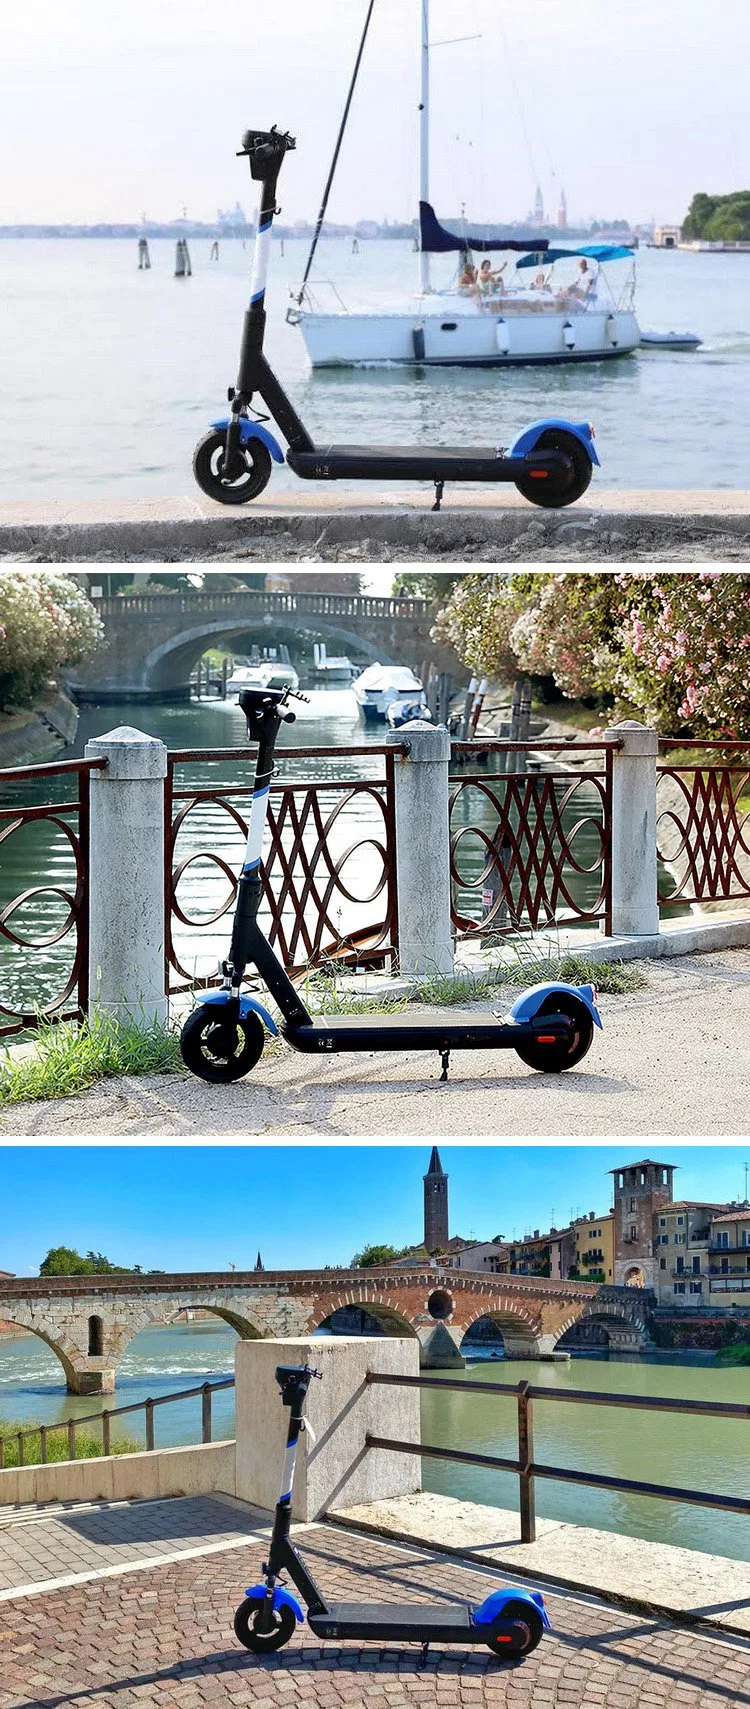 2G/3G/4G 2023 New Rental GPS APP Function Bird Electric Scooter Shared